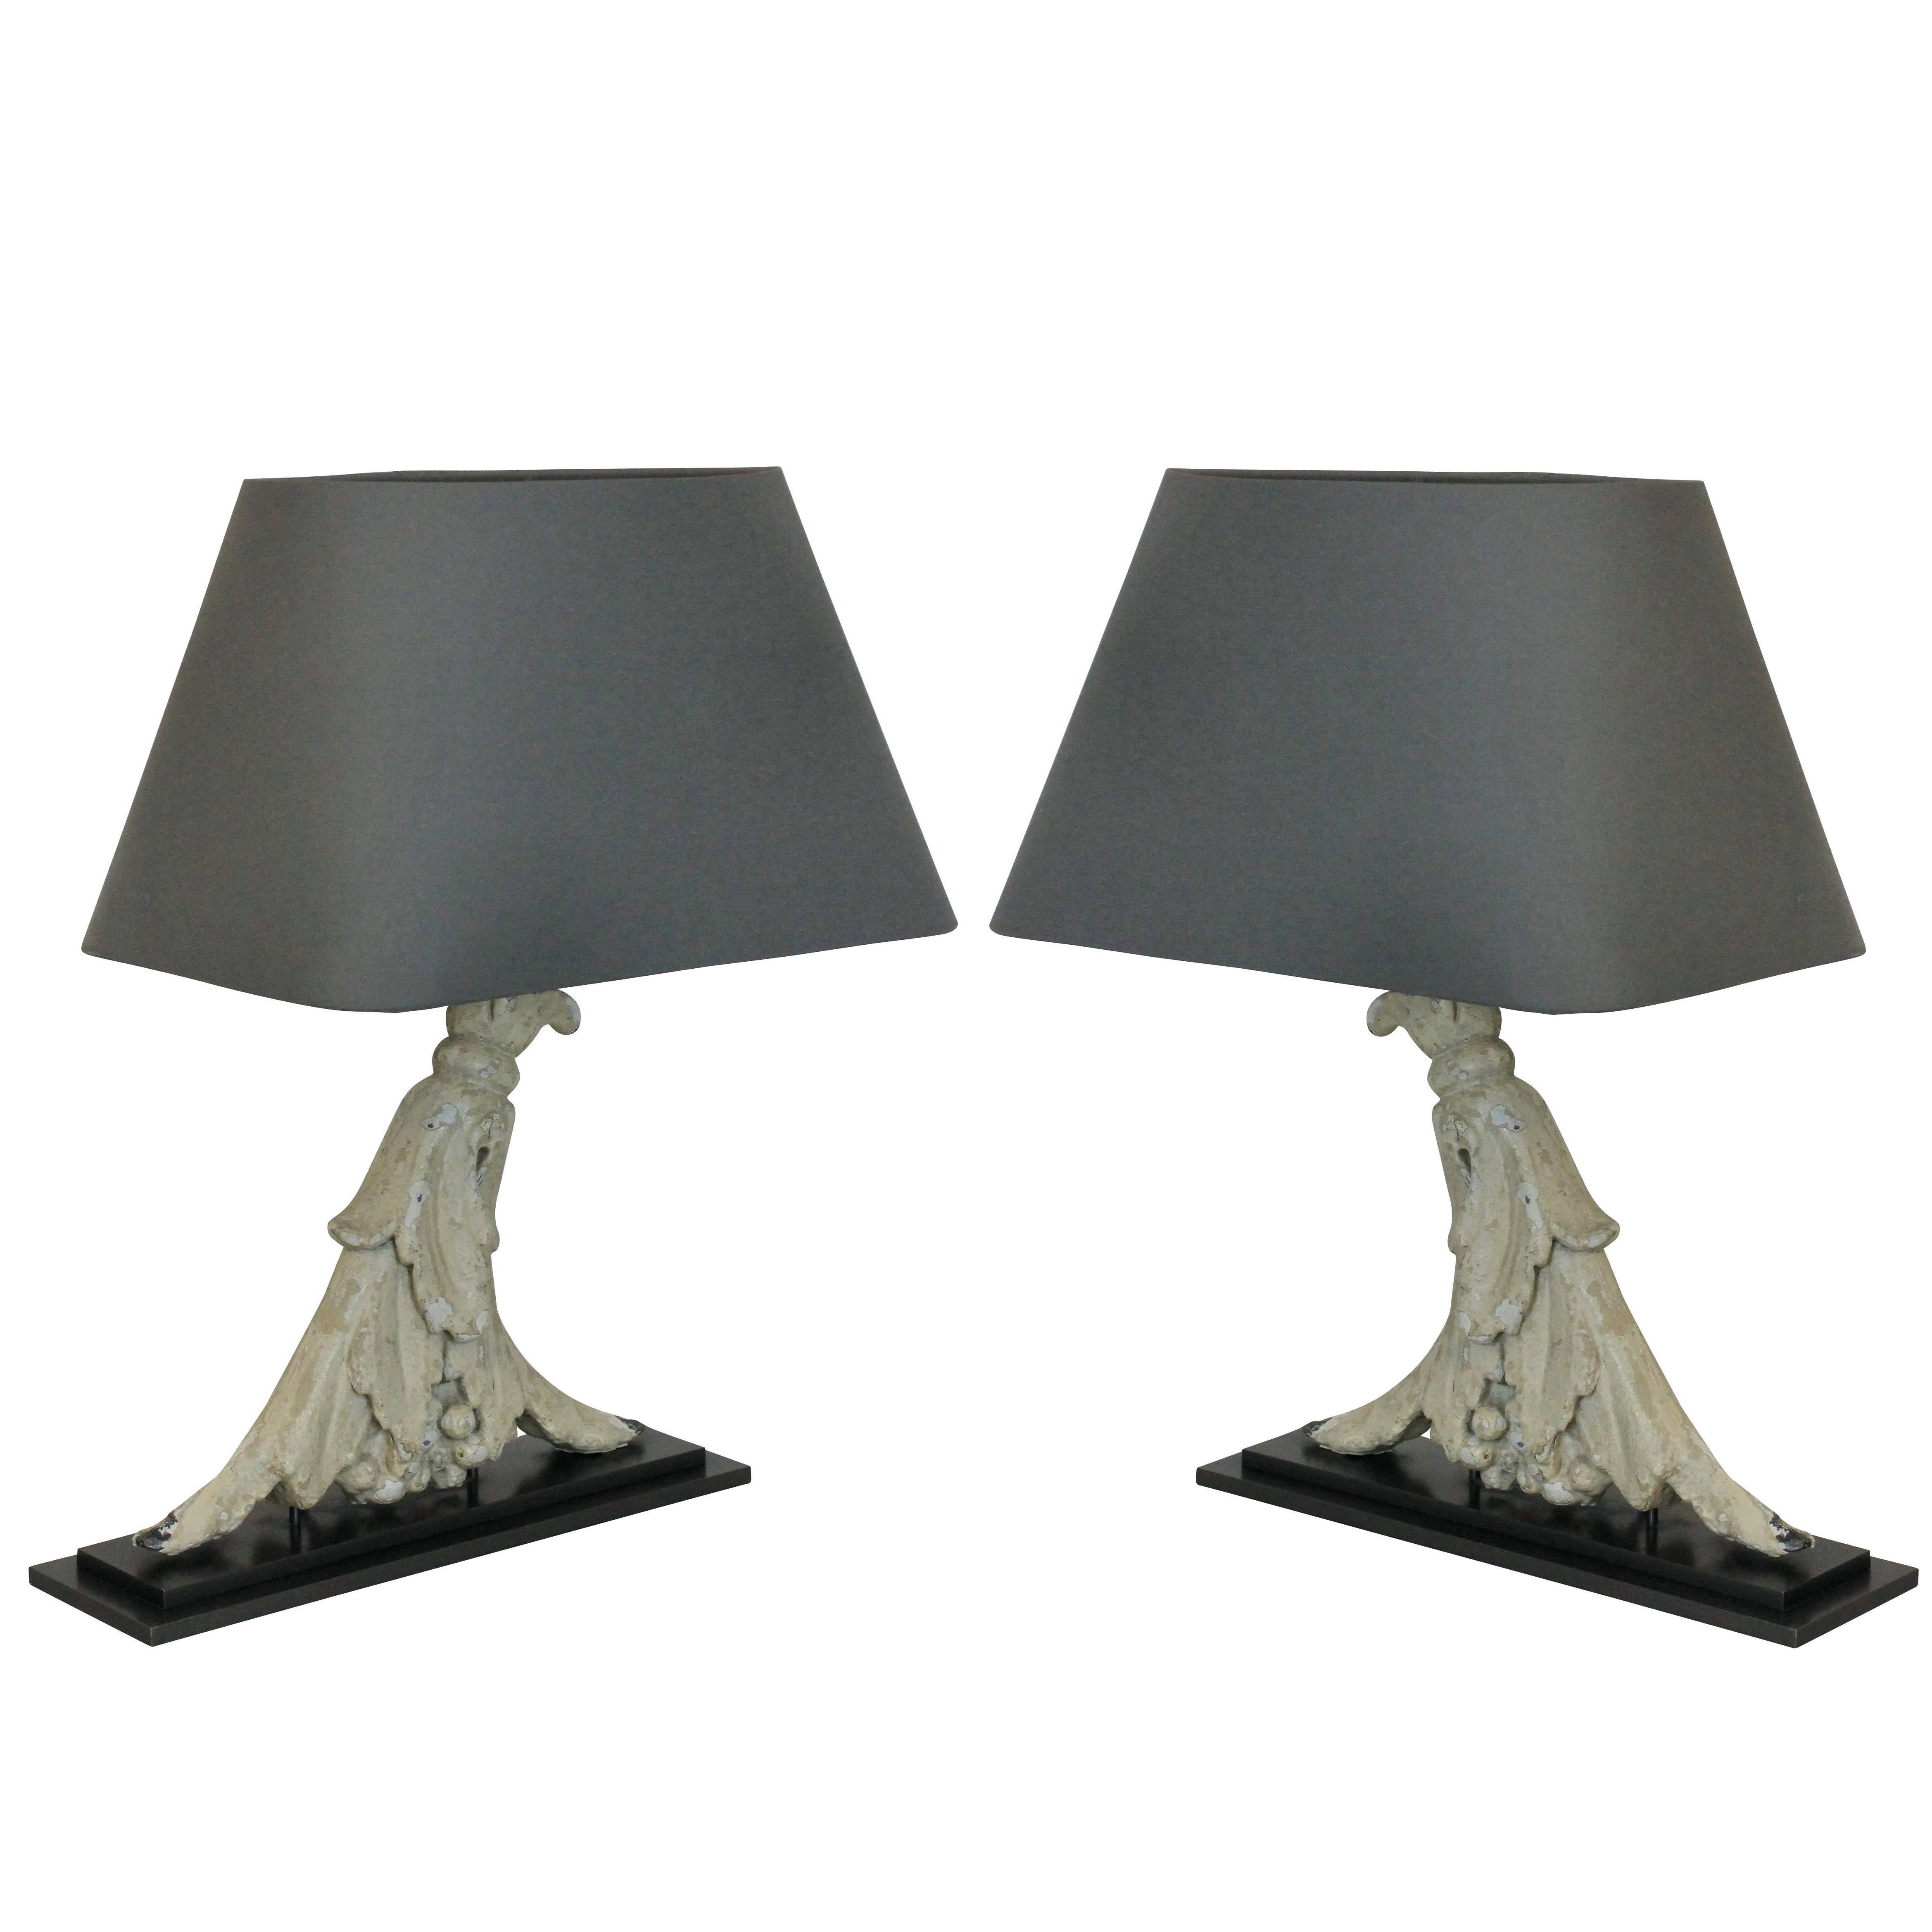 Pair of Architectural Lamps